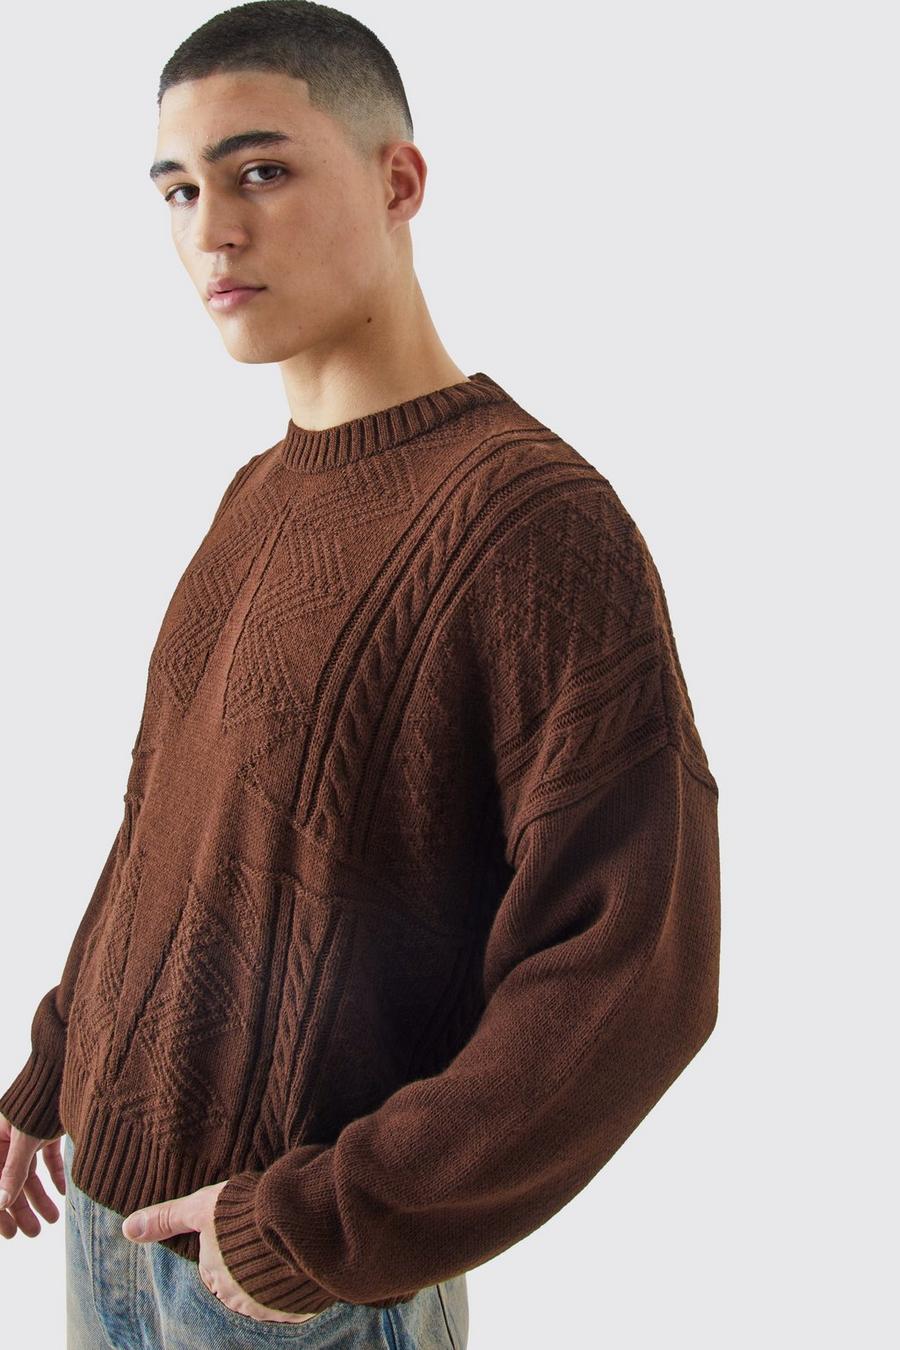 Chocolate brown Oversized Boxy Star Cable Knit Jumper